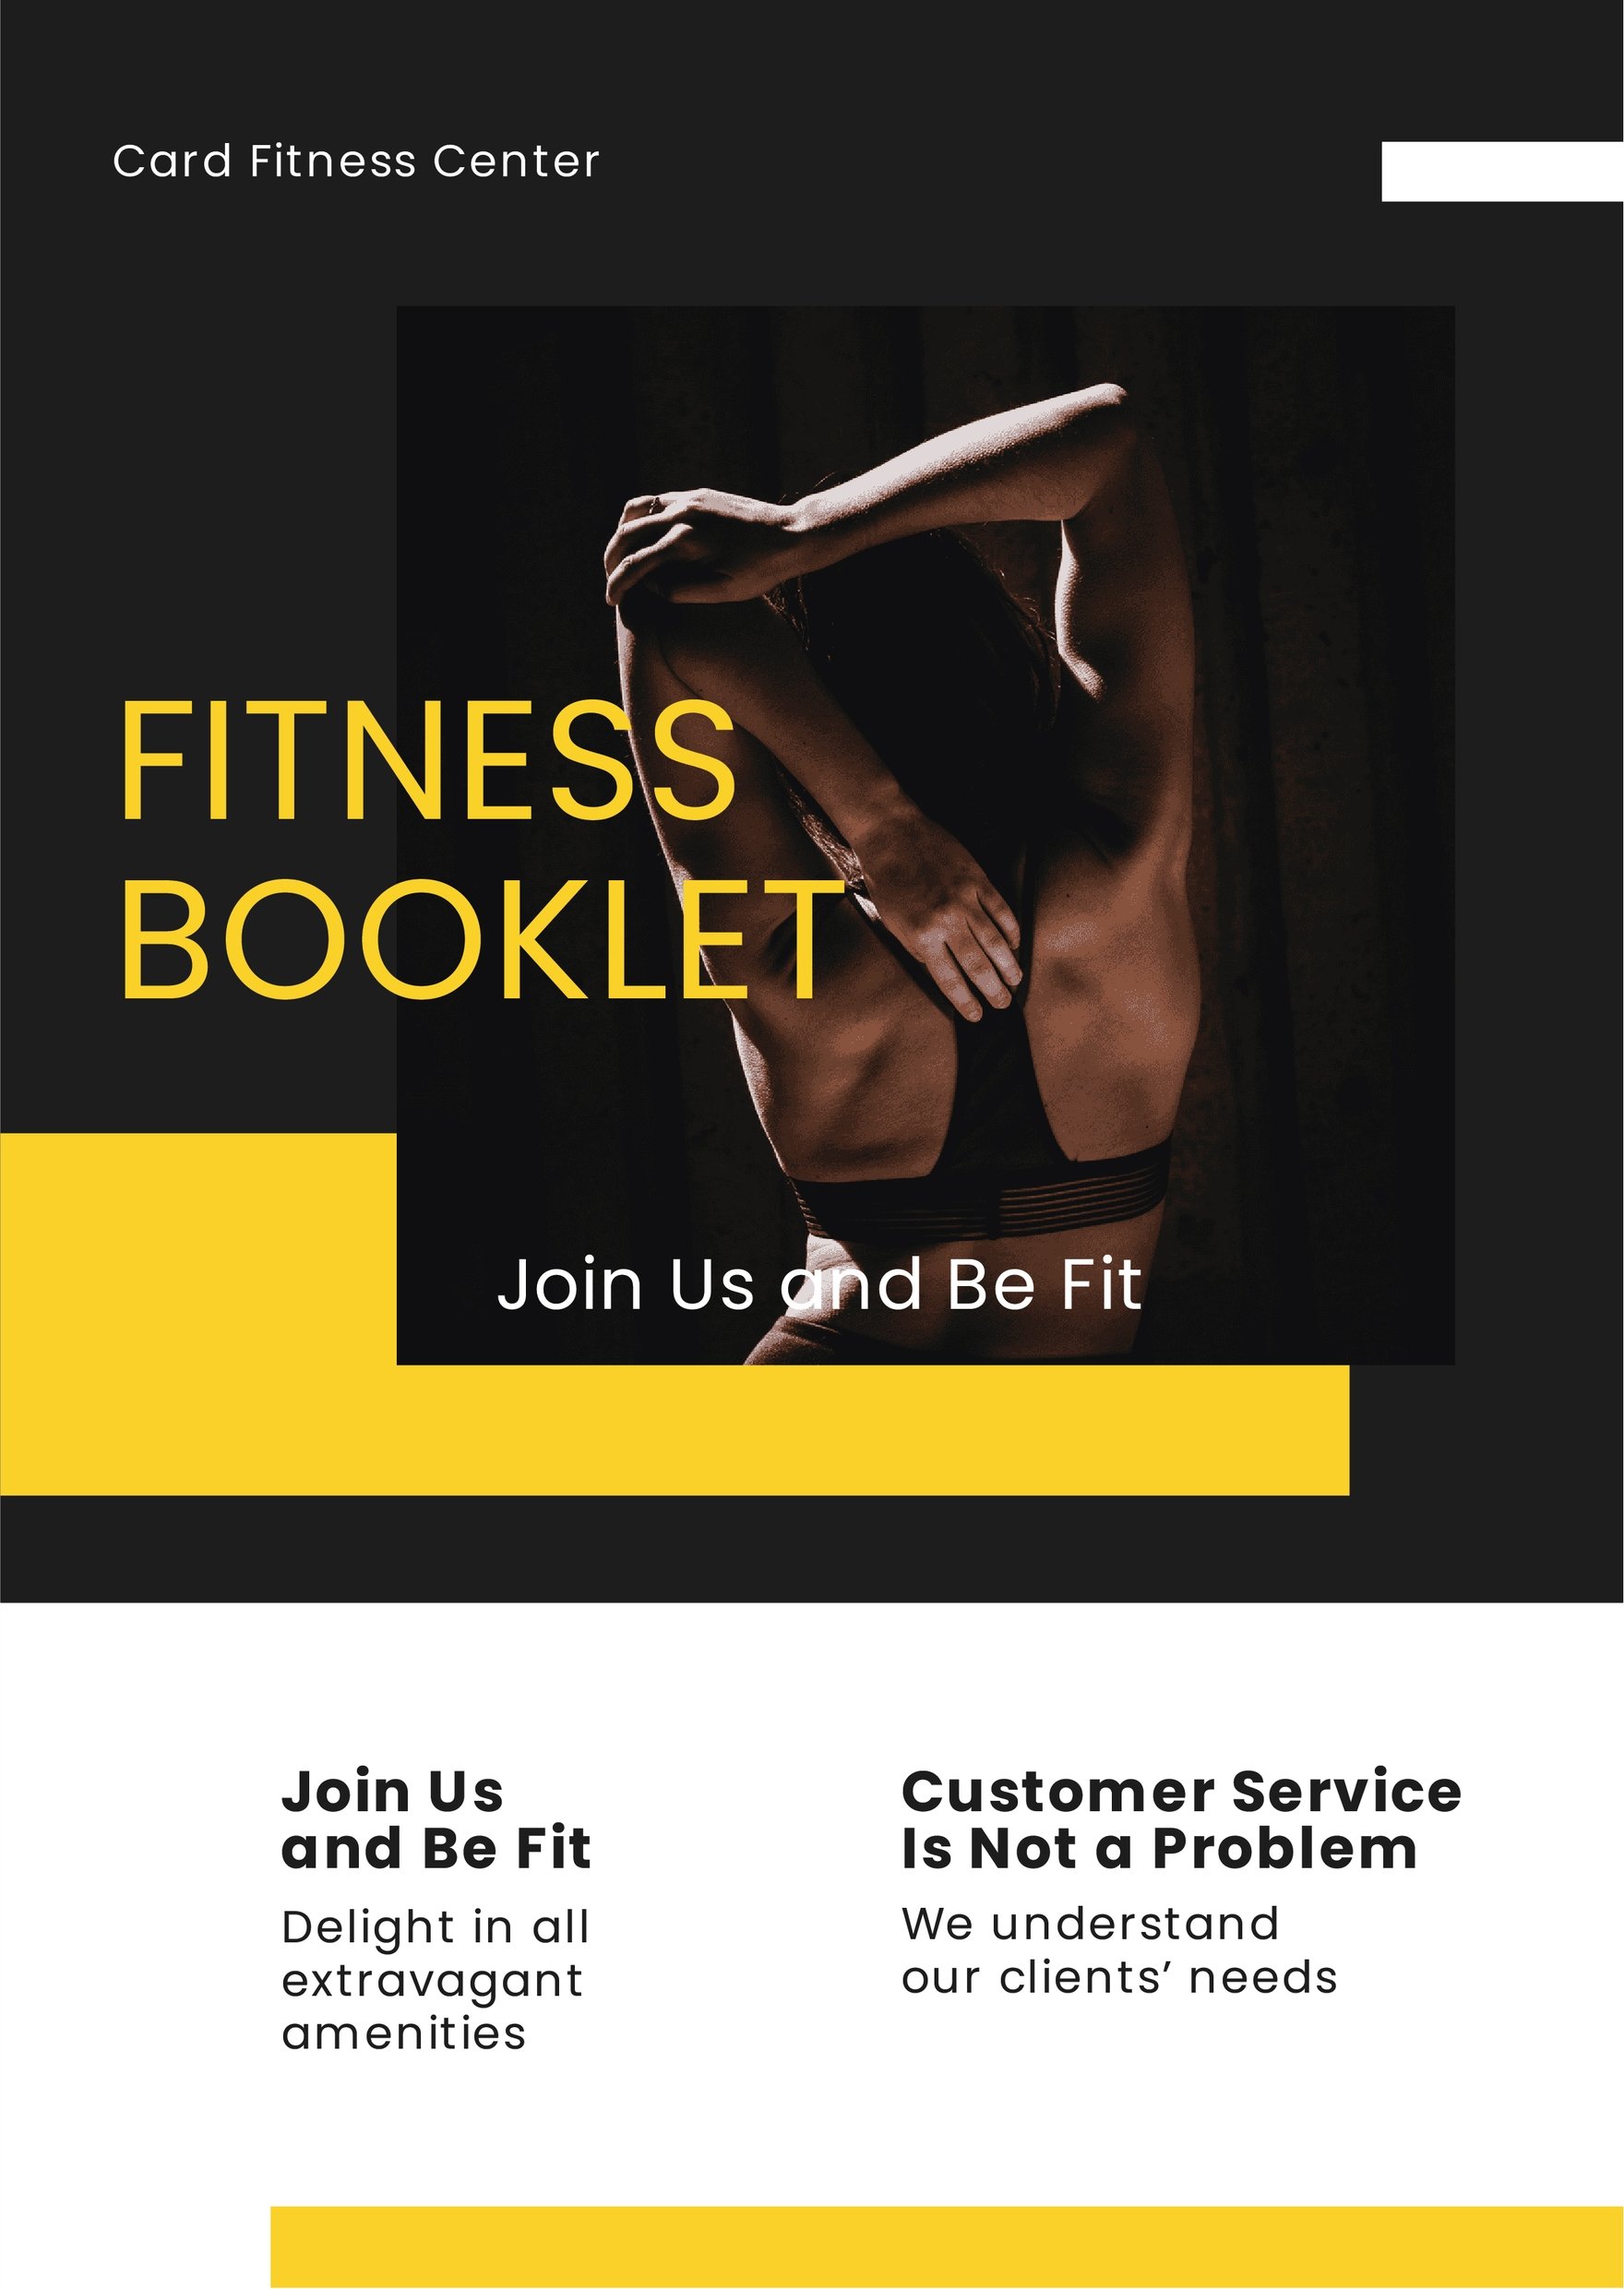 Fitness Booklet Template in Word, Google Docs, Illustrator, PSD, Apple Pages, Publisher